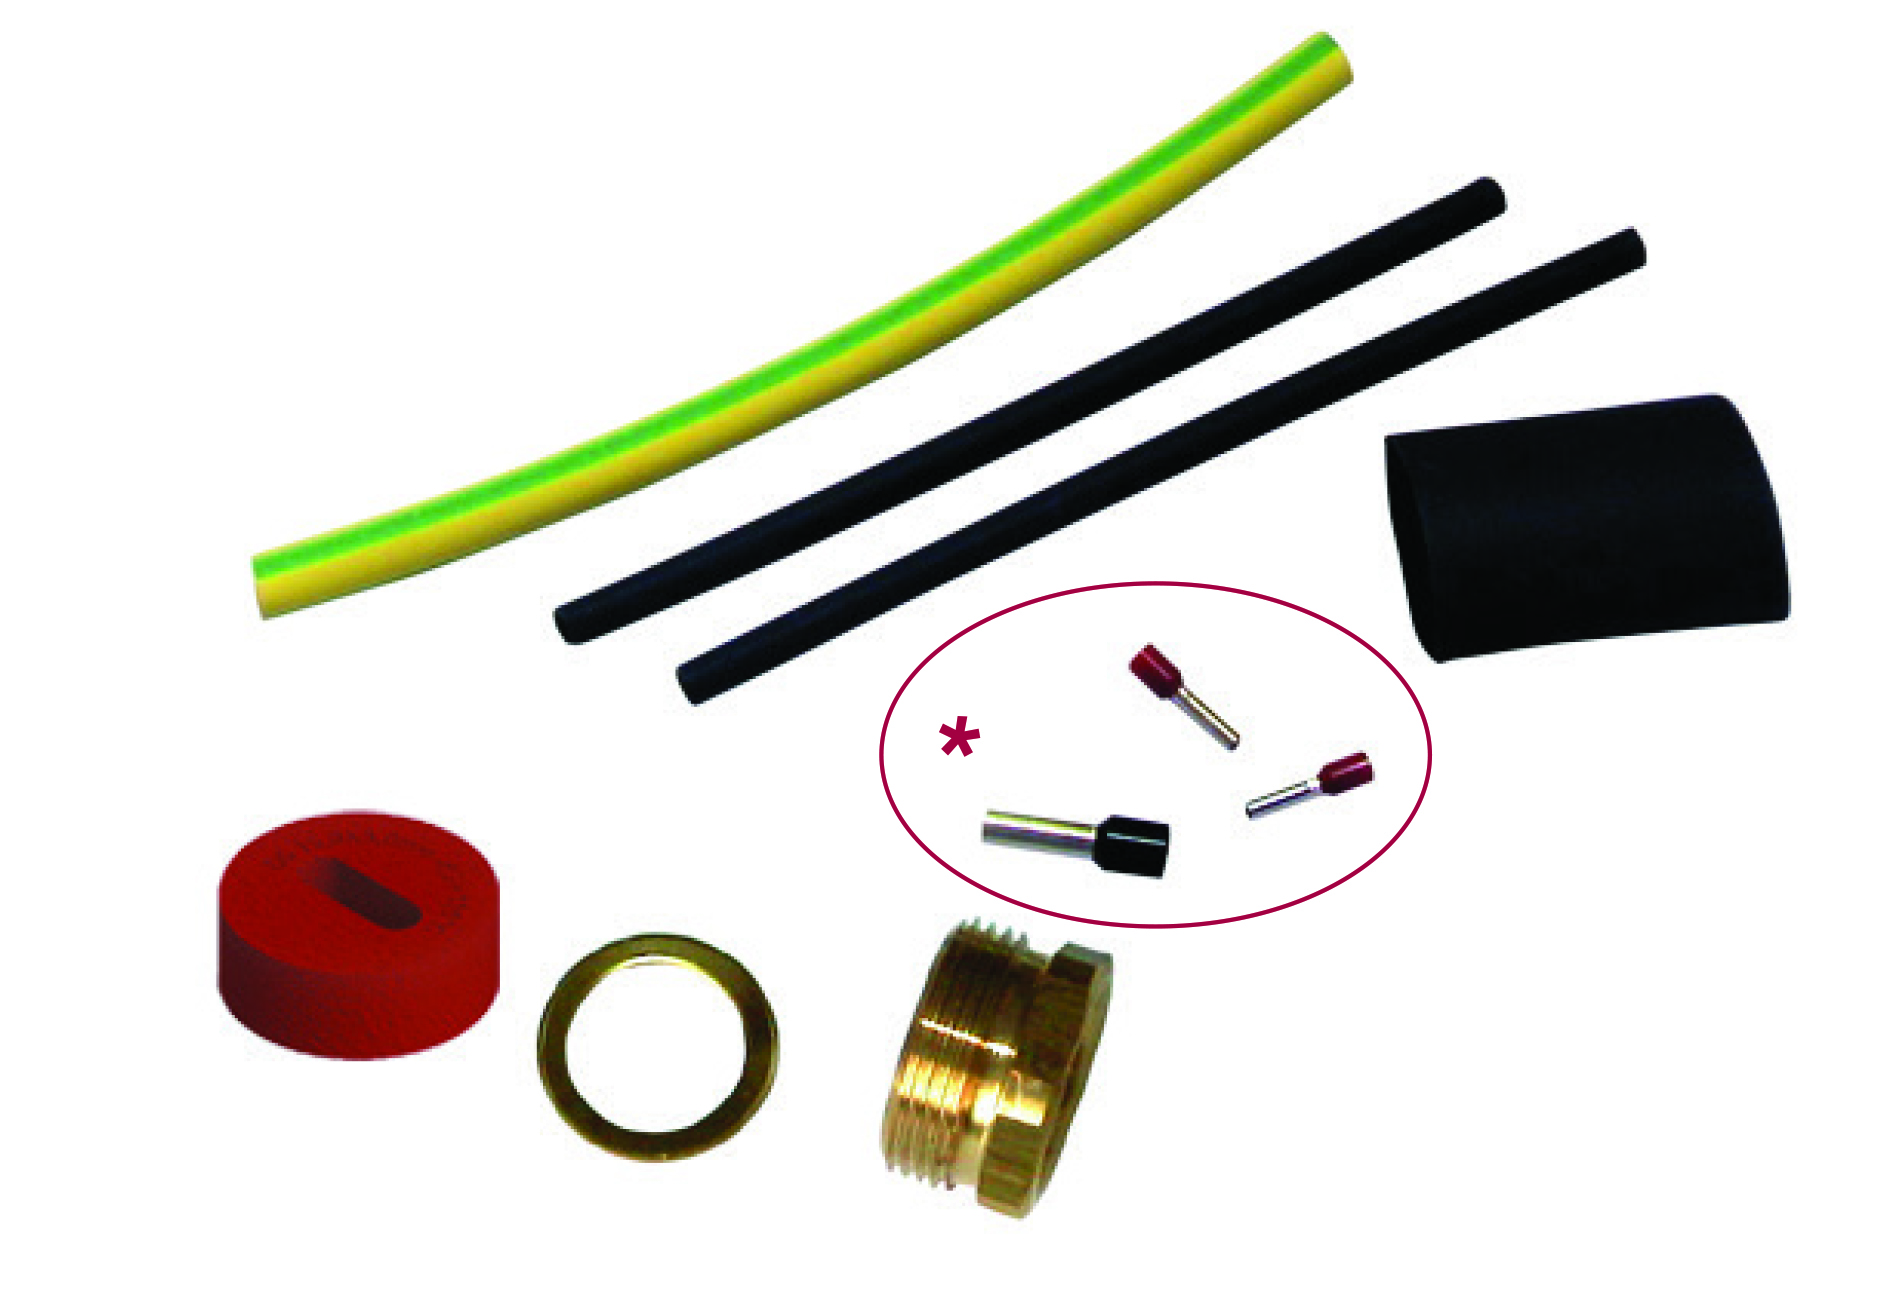 Connection kit Pipe Mounting for Raychem Cables: 8BTV-10BTV-20QTVR-KTV 5x15 - w/Termination kit HOT